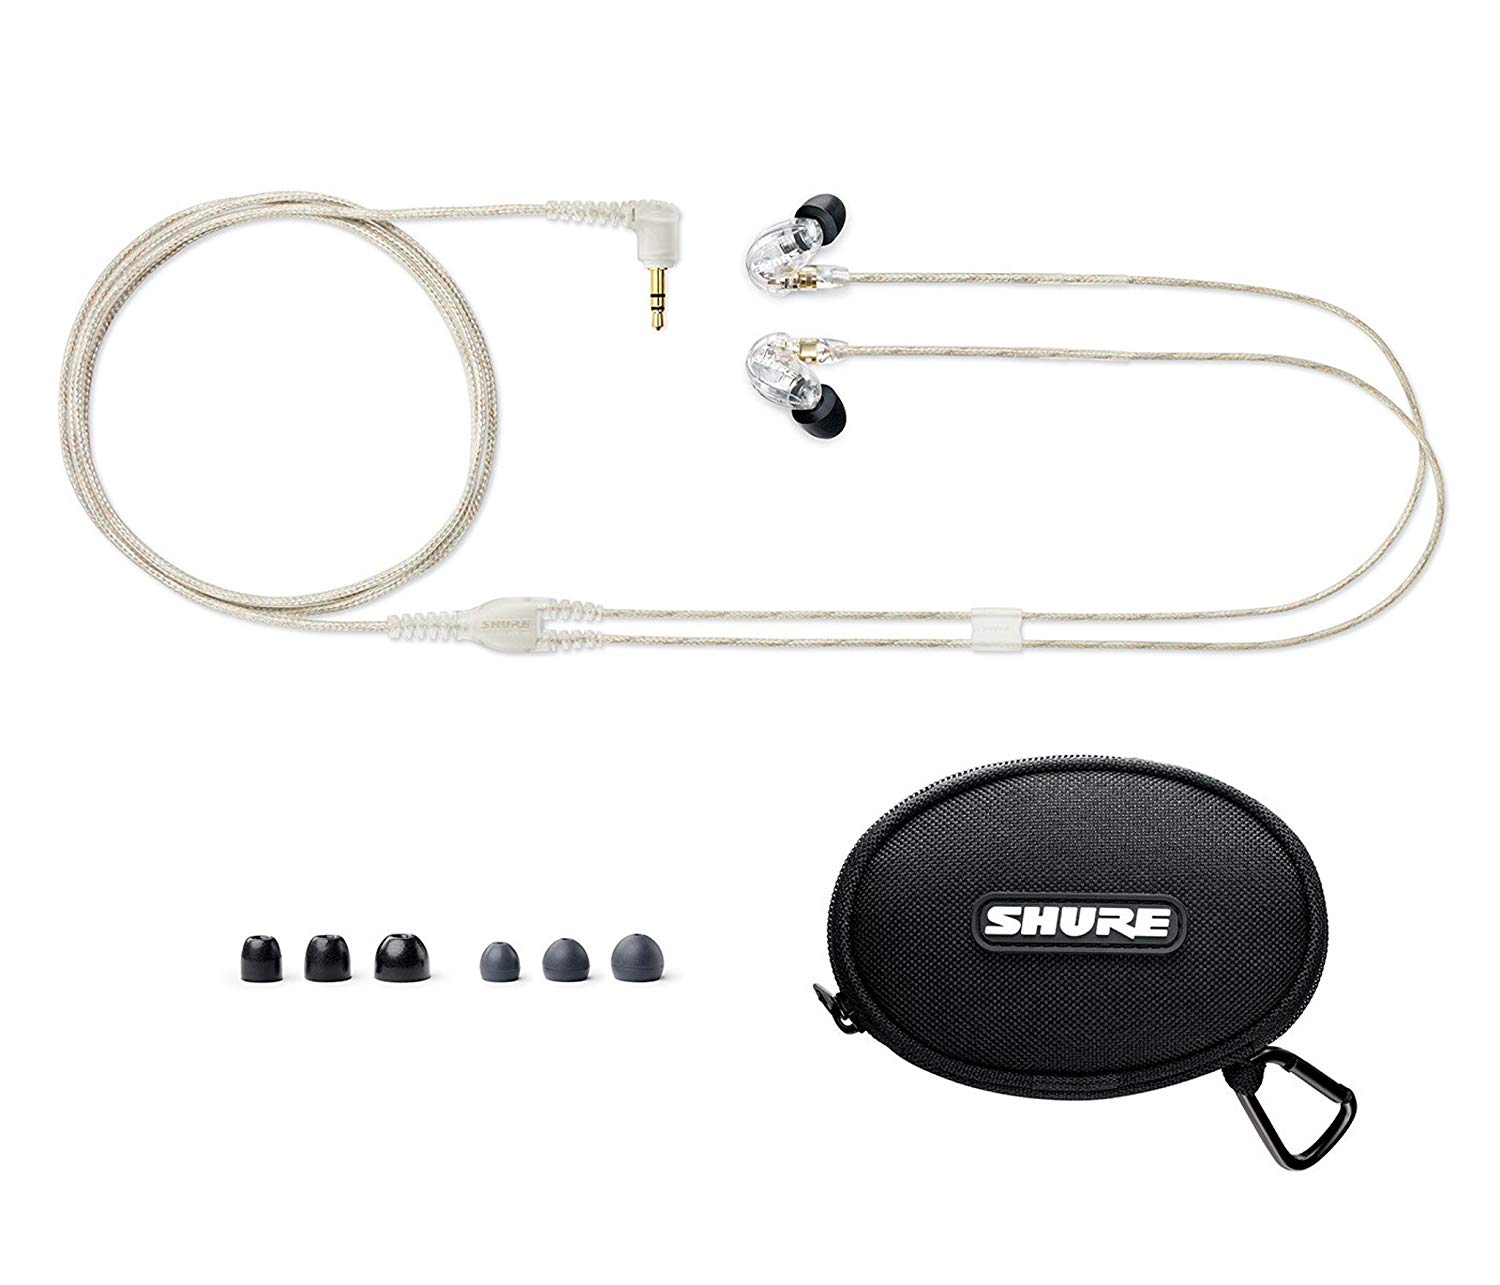 Shure SE215-CL Sound Isolating Earphones with Single Dynamic Mic